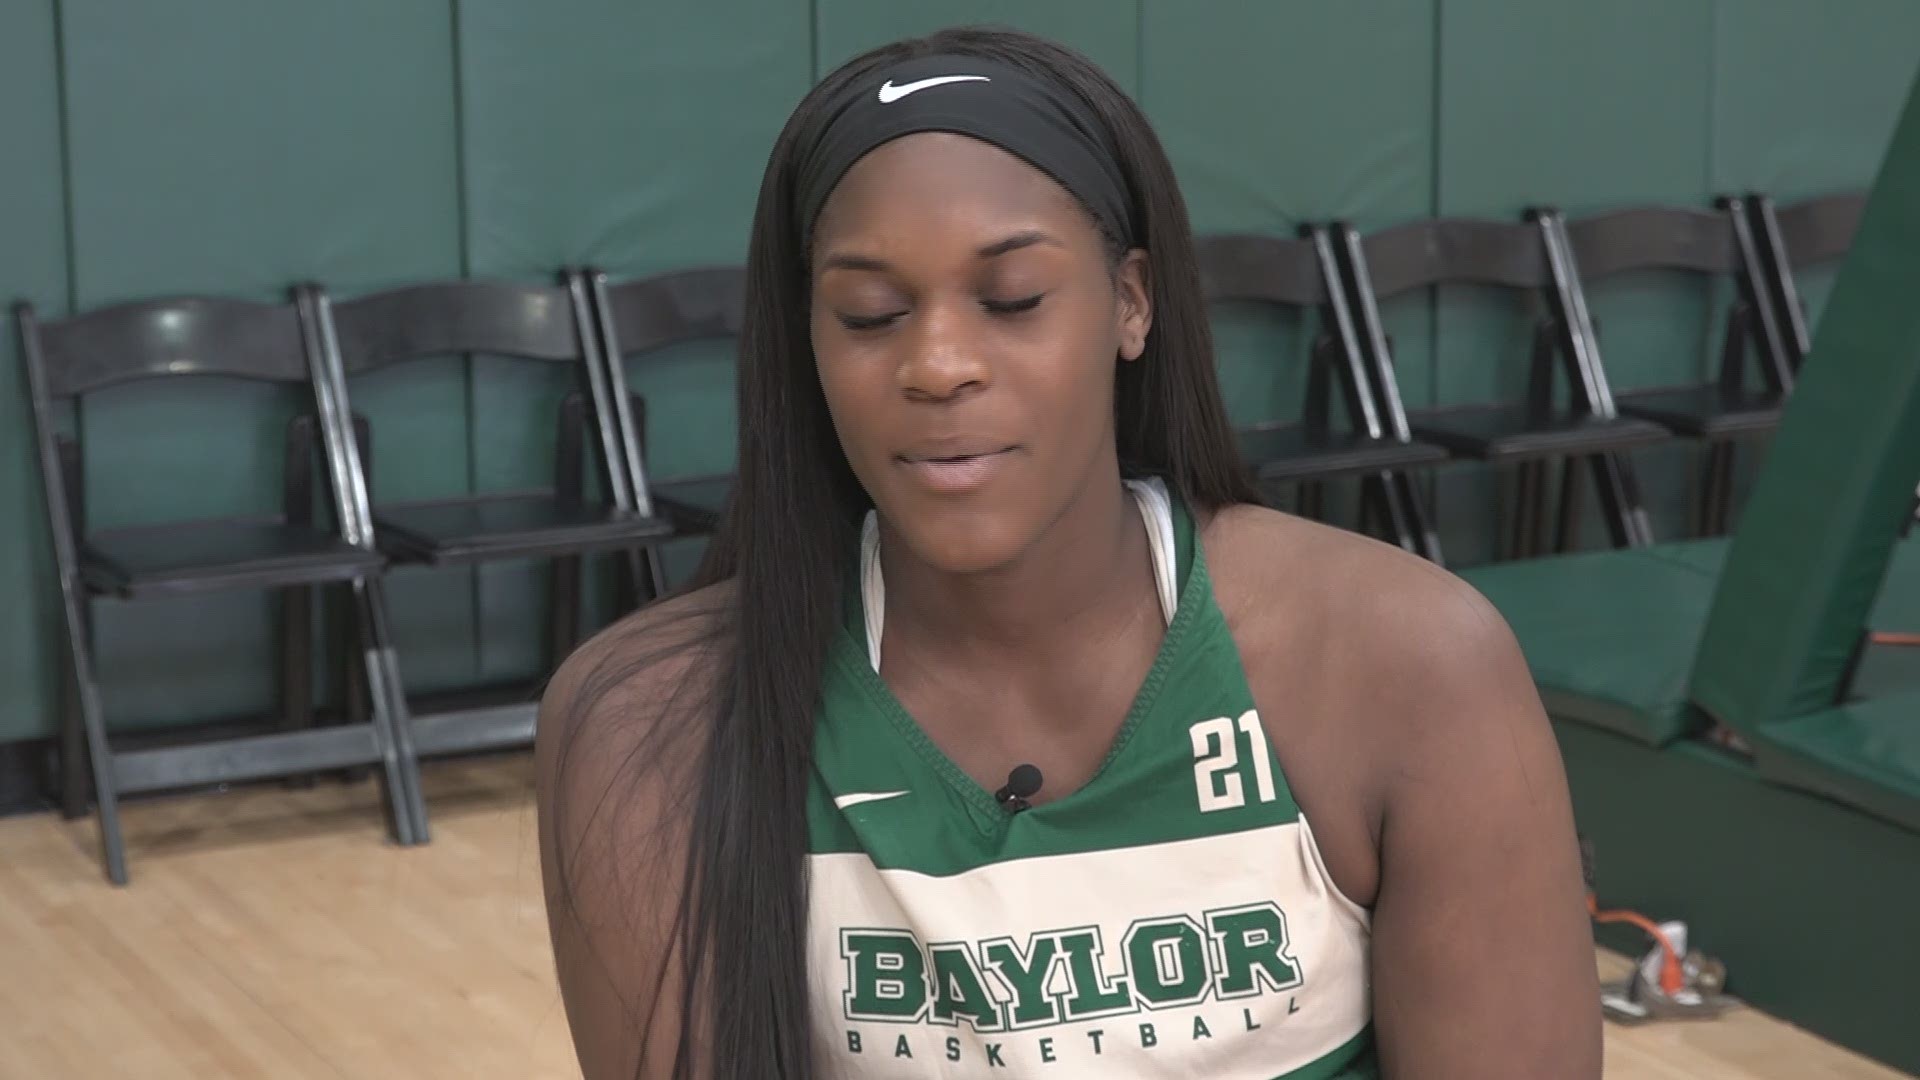 Senior Kalani Brown has learned a lot in her four years under coach Mulkey.